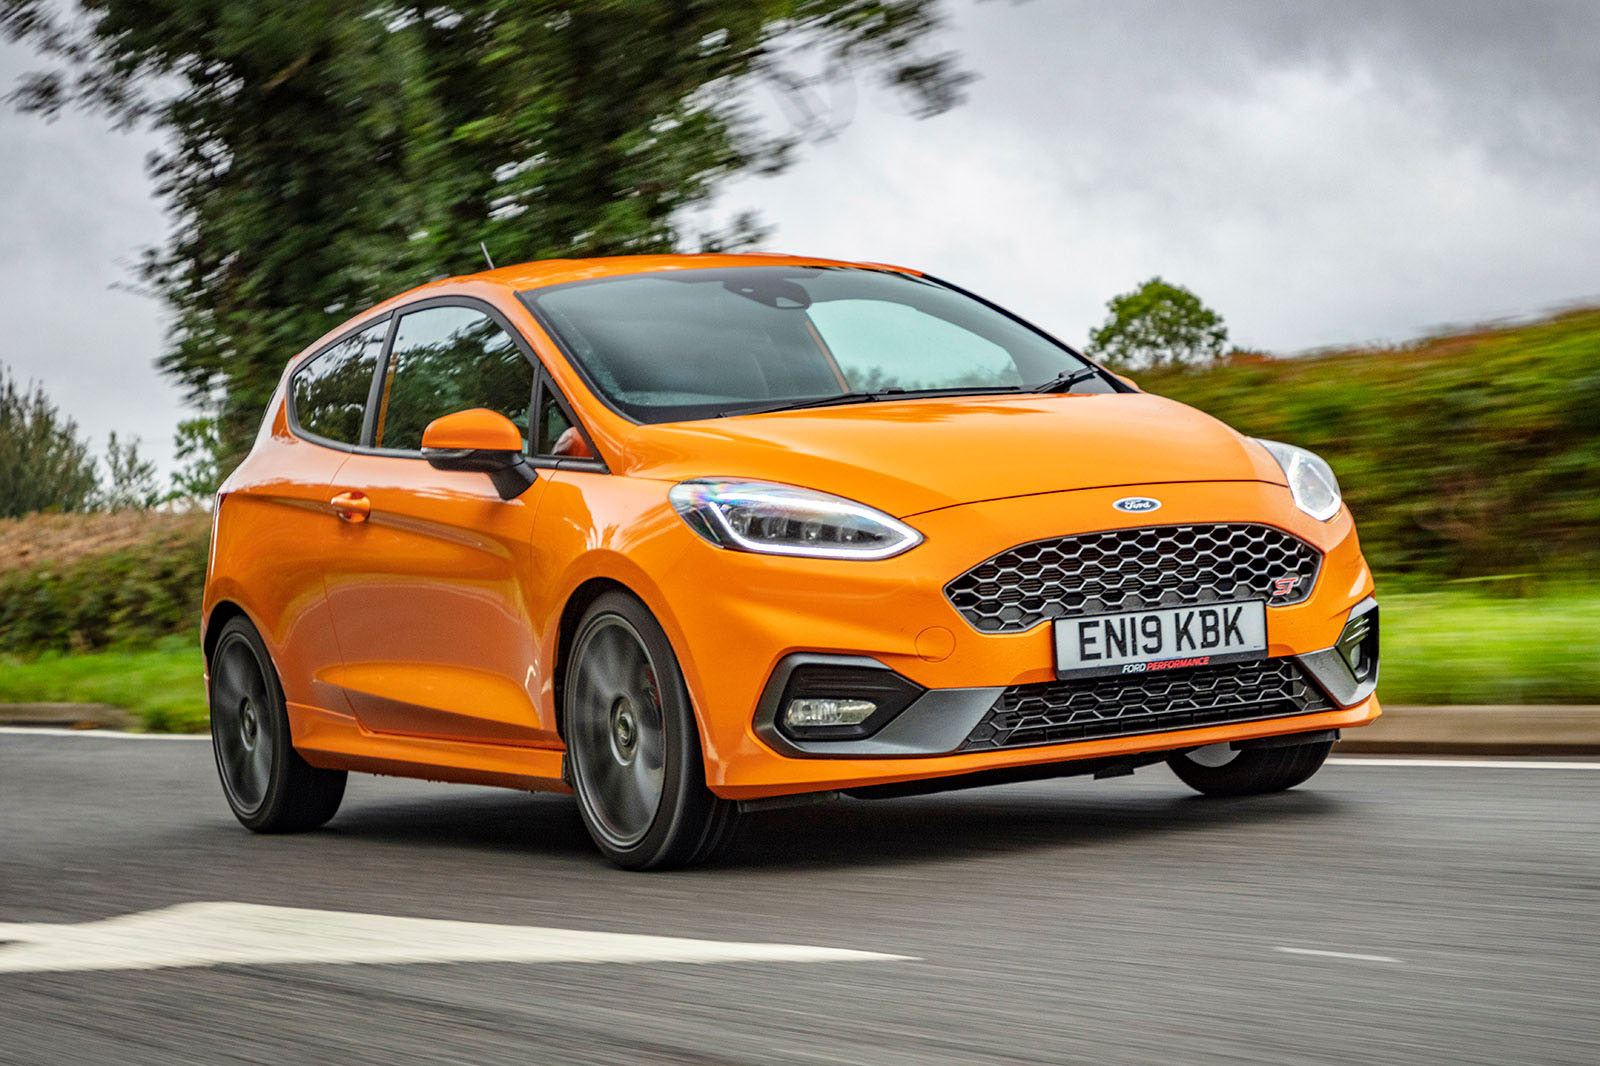 https://www.autocar.co.uk/sites/autocar.co.uk/files/images/car-reviews/first-drives/legacy/1-ford-fiesta-st-performance-2019-fd-hero-front.jpg